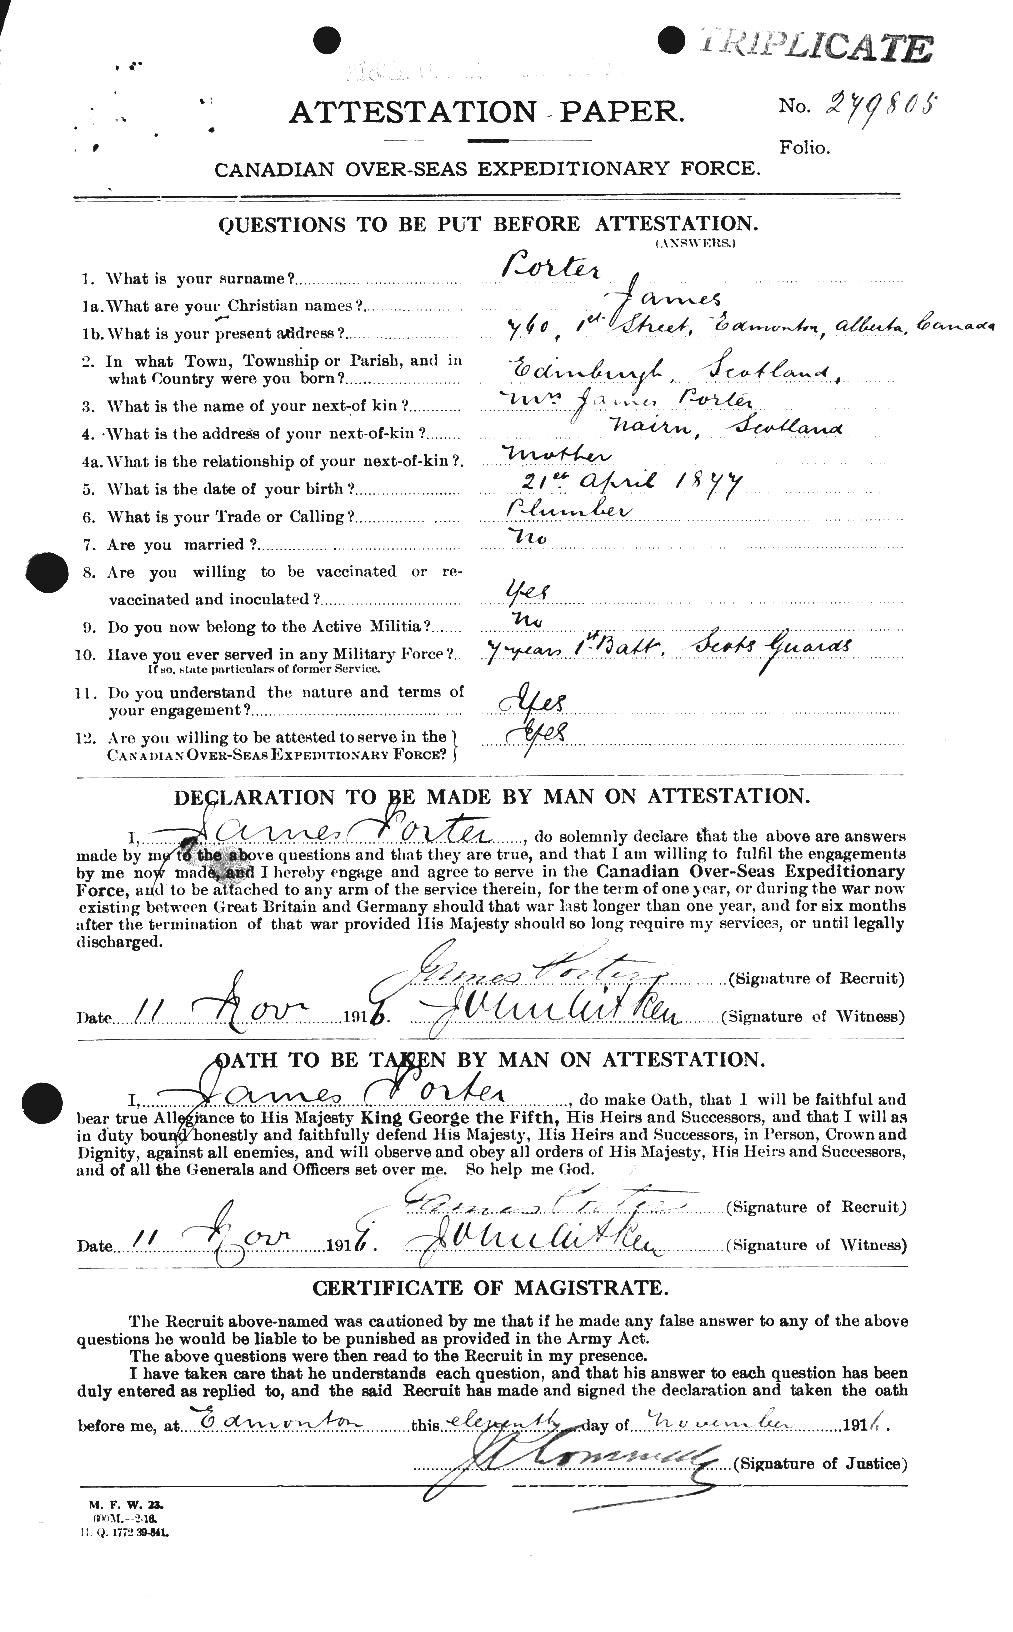 Personnel Records of the First World War - CEF 583661a